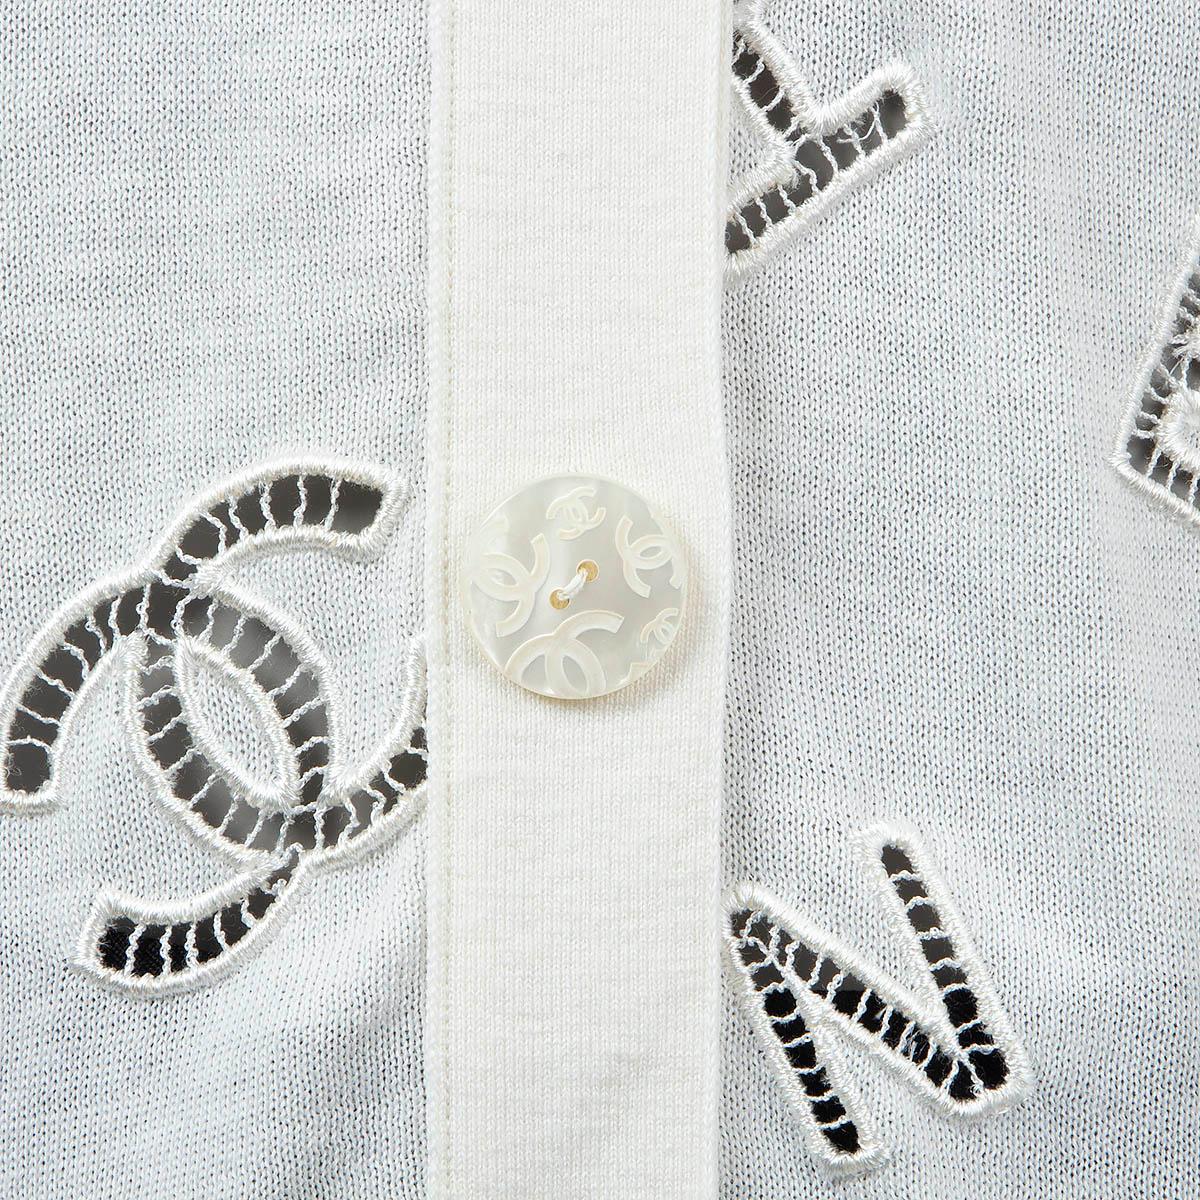 CHANEL ivory cotton 2020 20C LOGO EMBROIDERED Cardigan Sweater 38 S 3